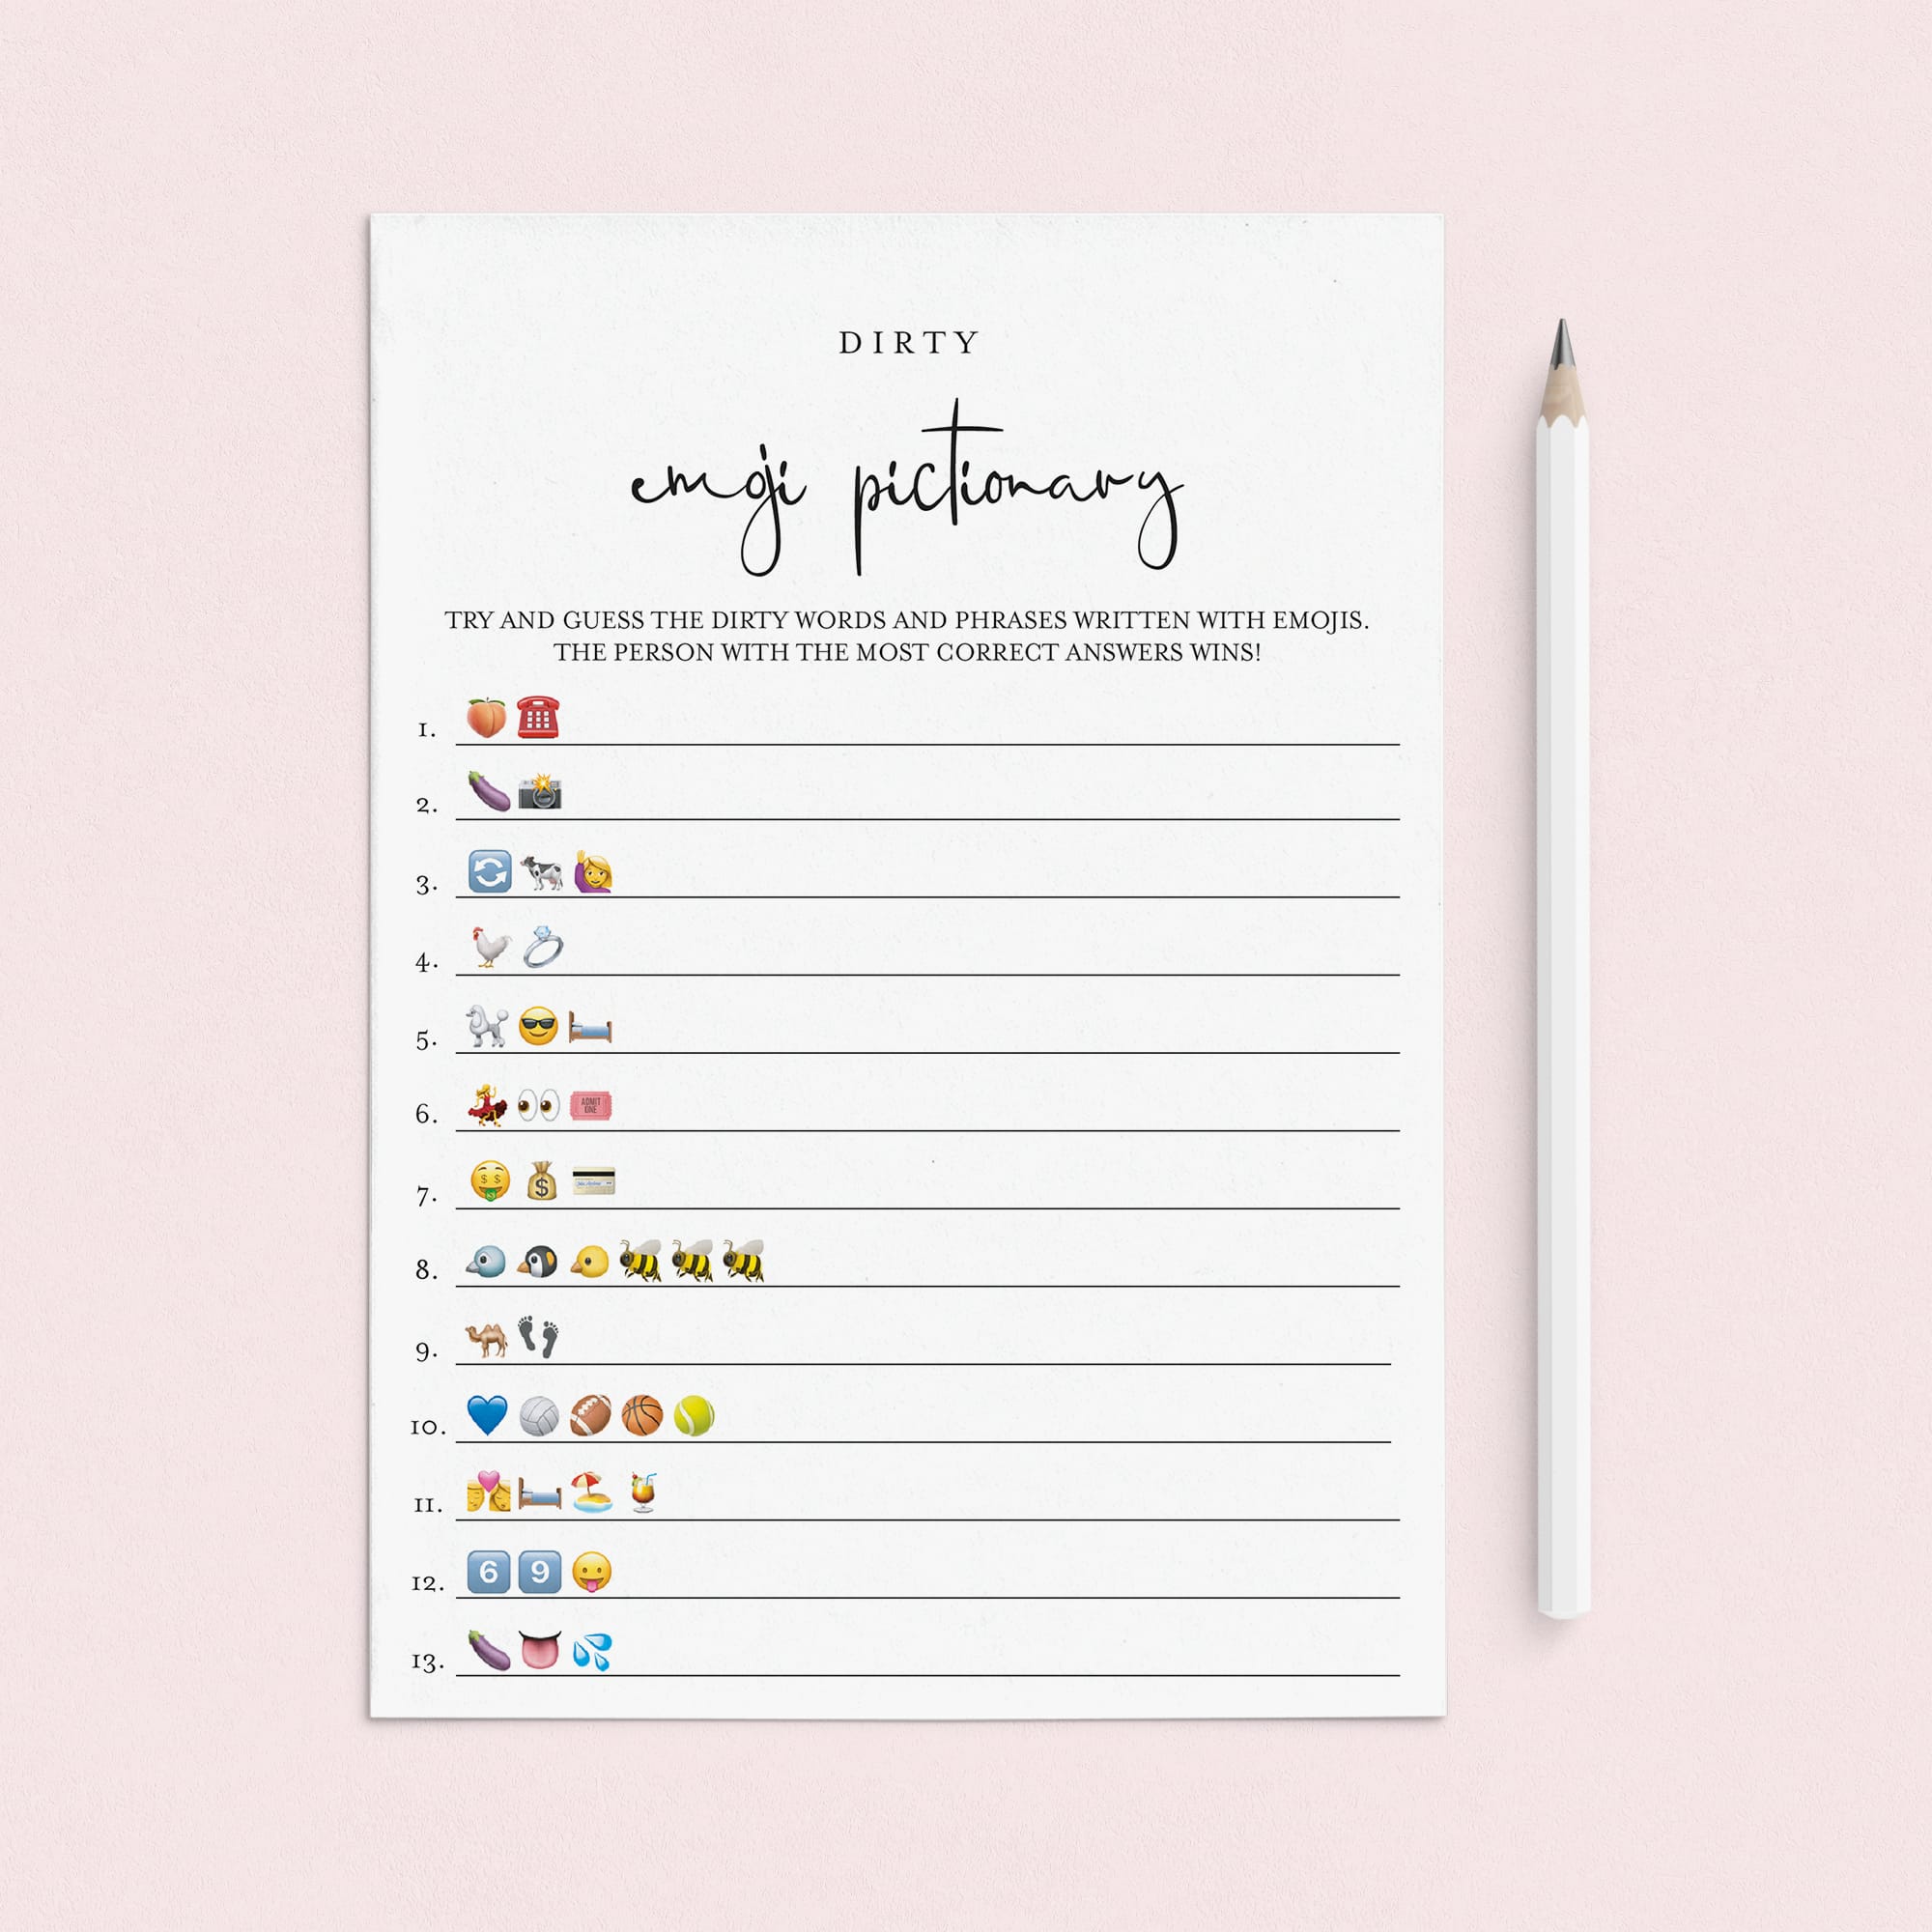 Dirty Emoji Pictionary Game With Answers Printable by LittleSizzle